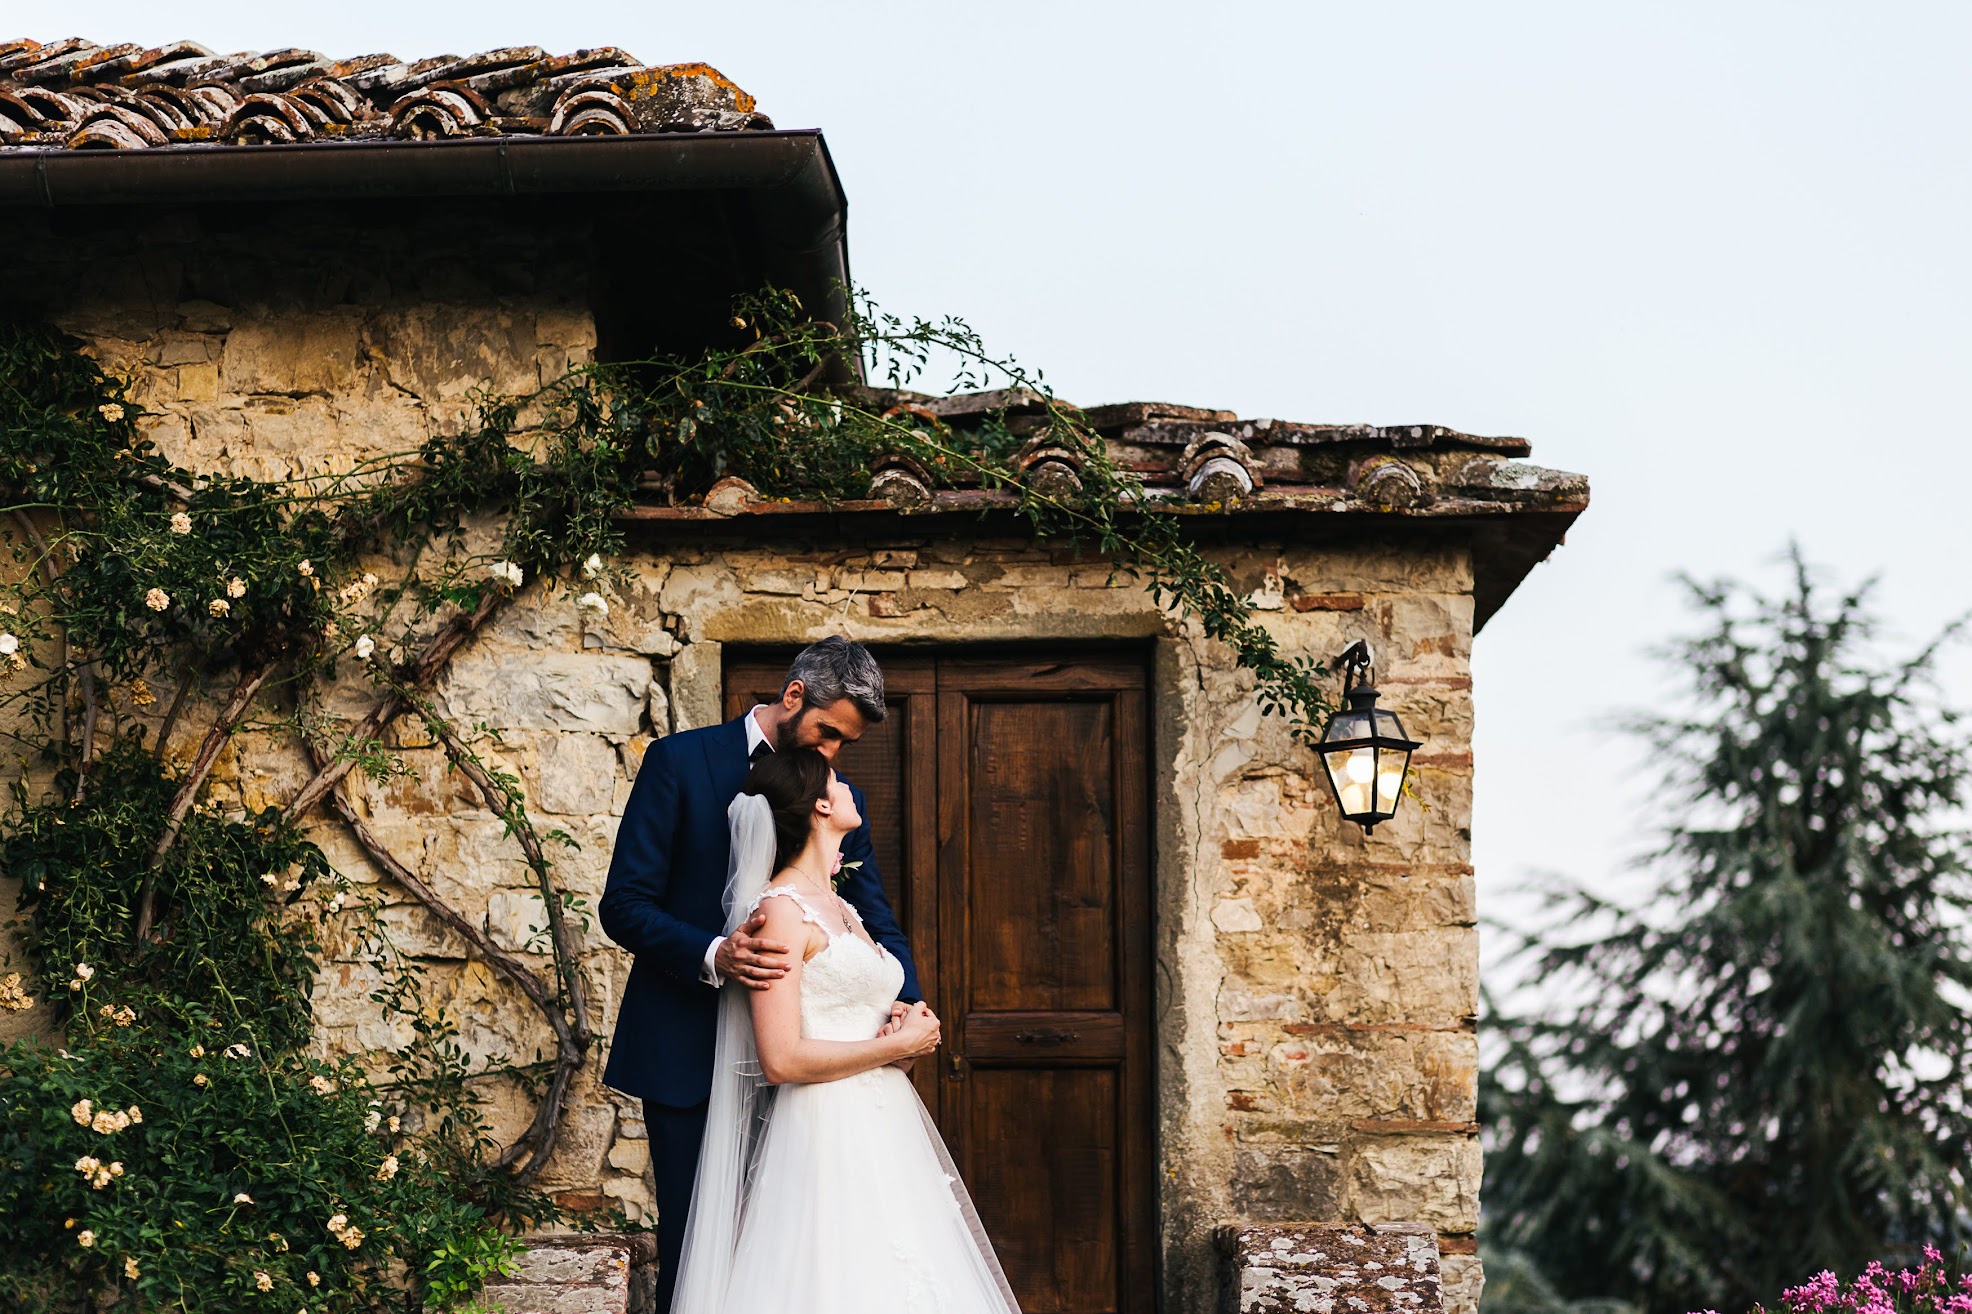 How to Plan an Intimate Wedding in Tuscany